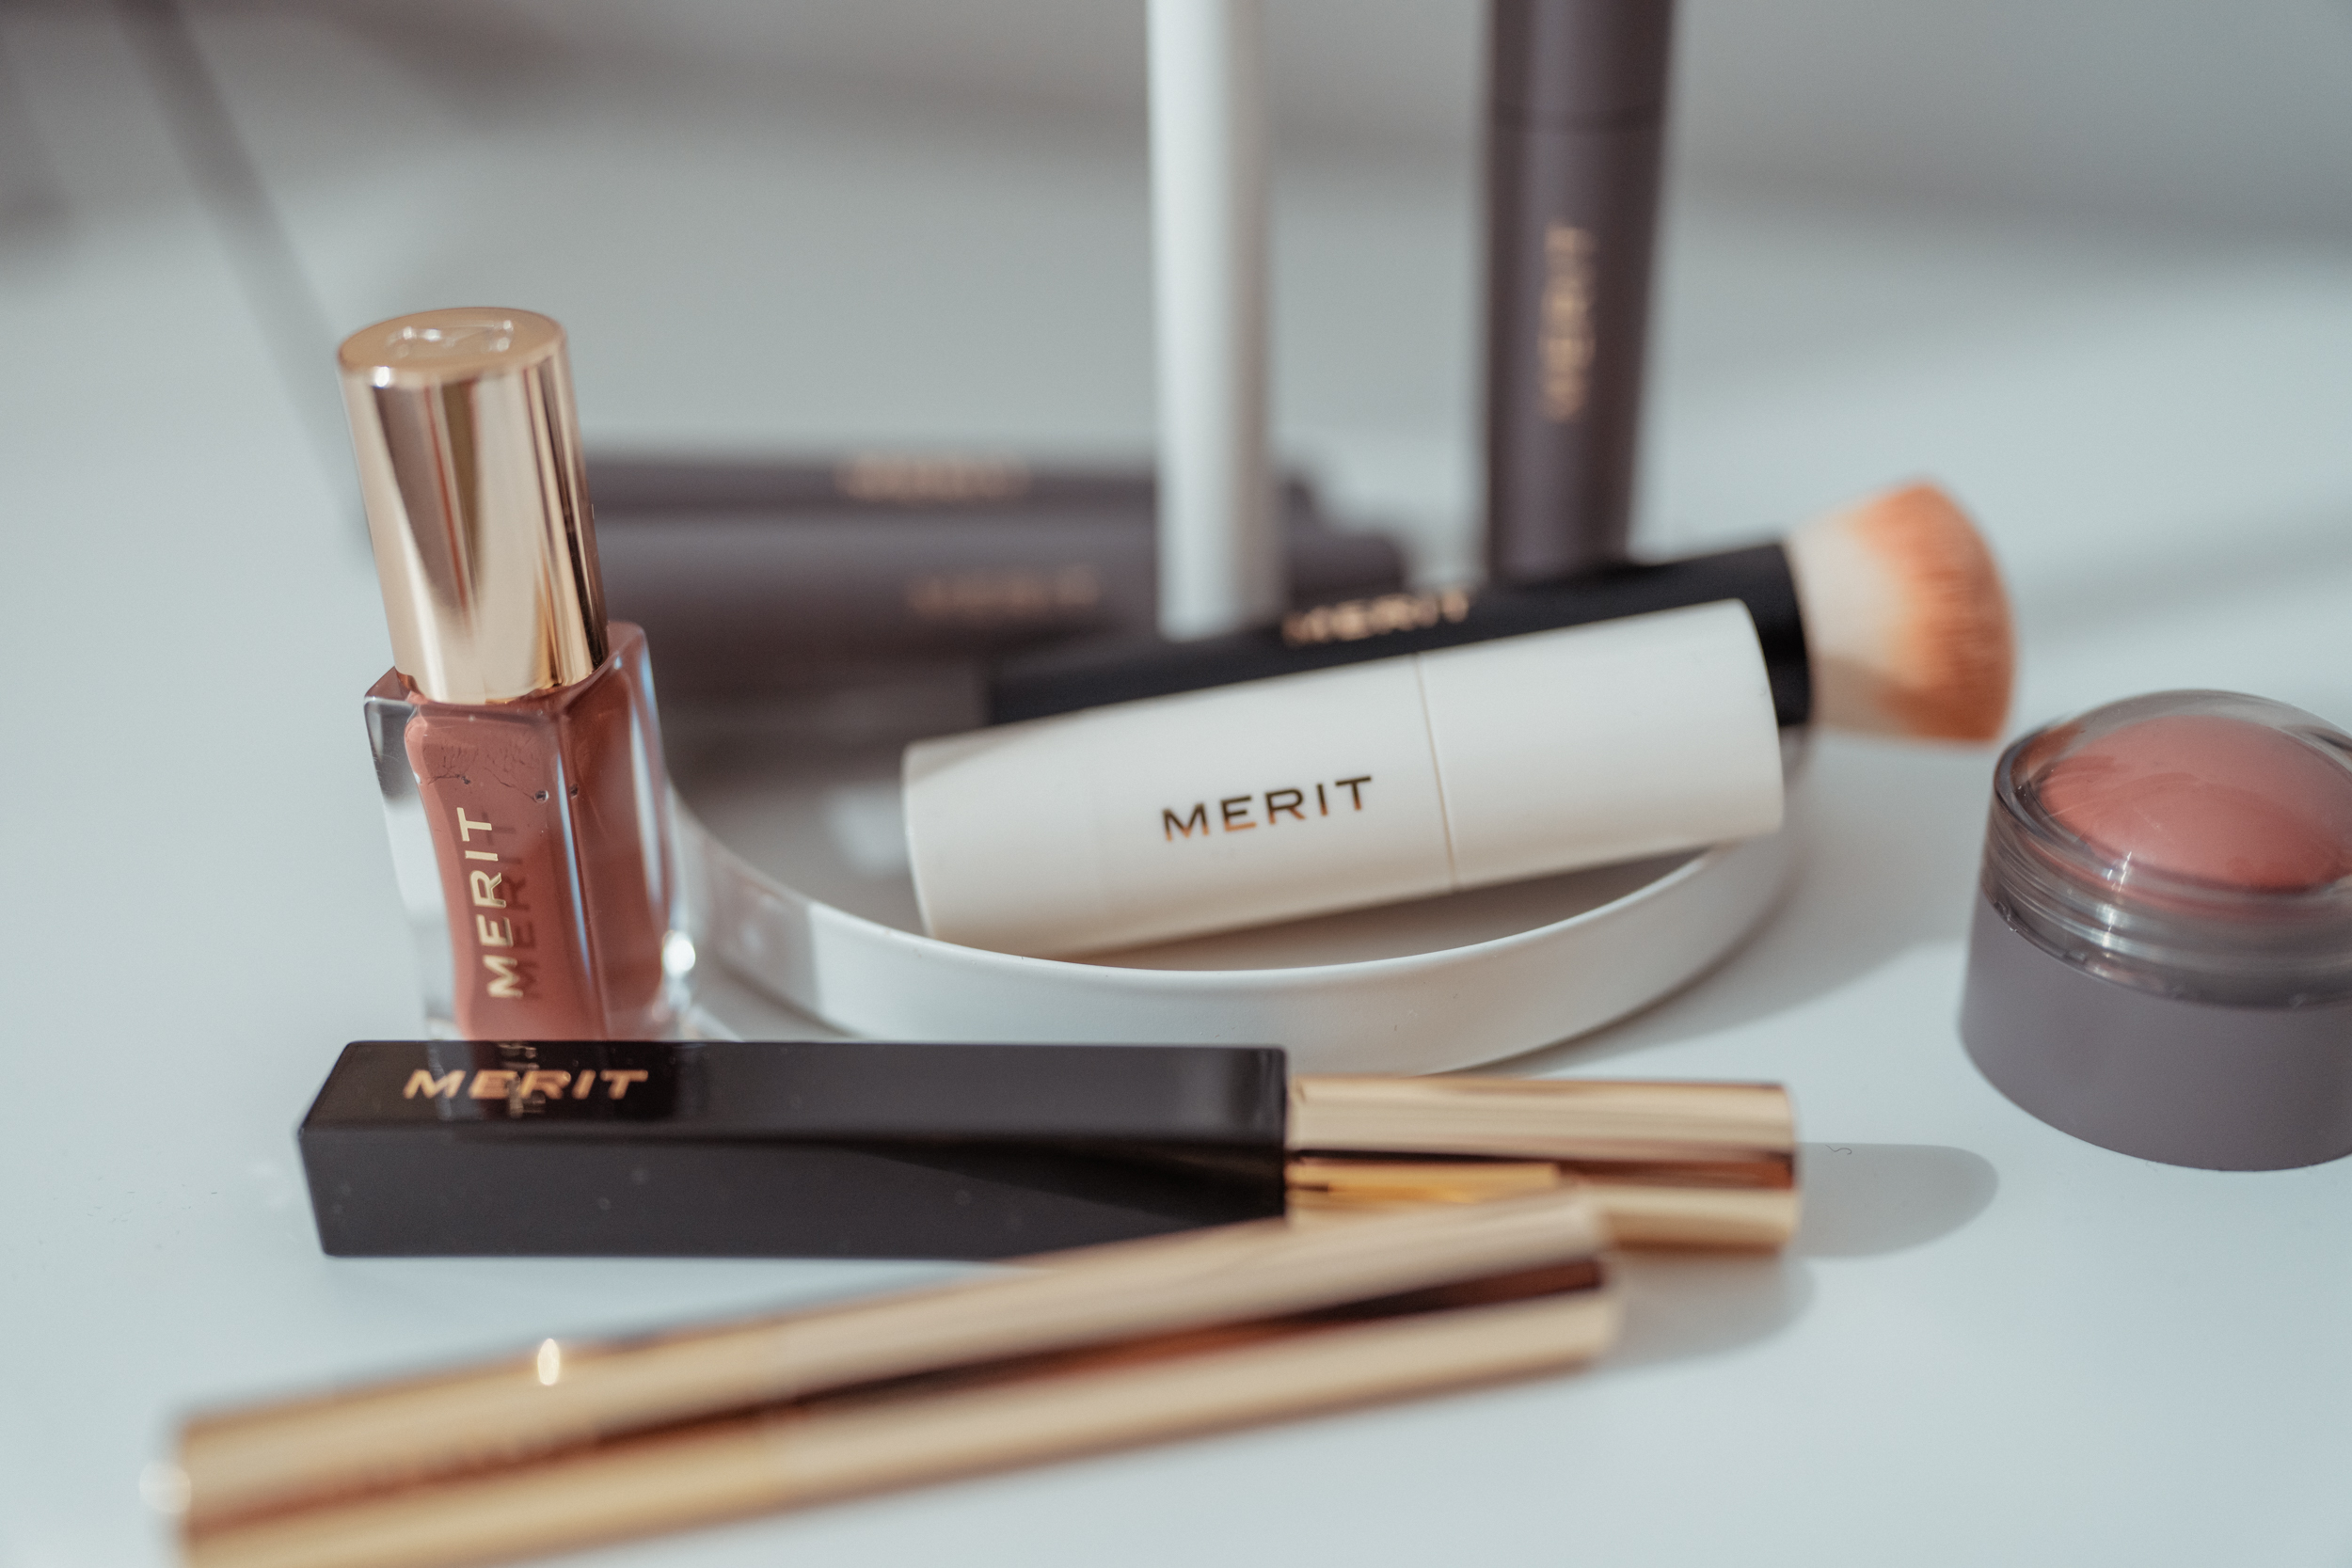 https://styleandsenses.com/merit-beauty-the-minimalist-makeup-honest-review-of-all-of-the-products/